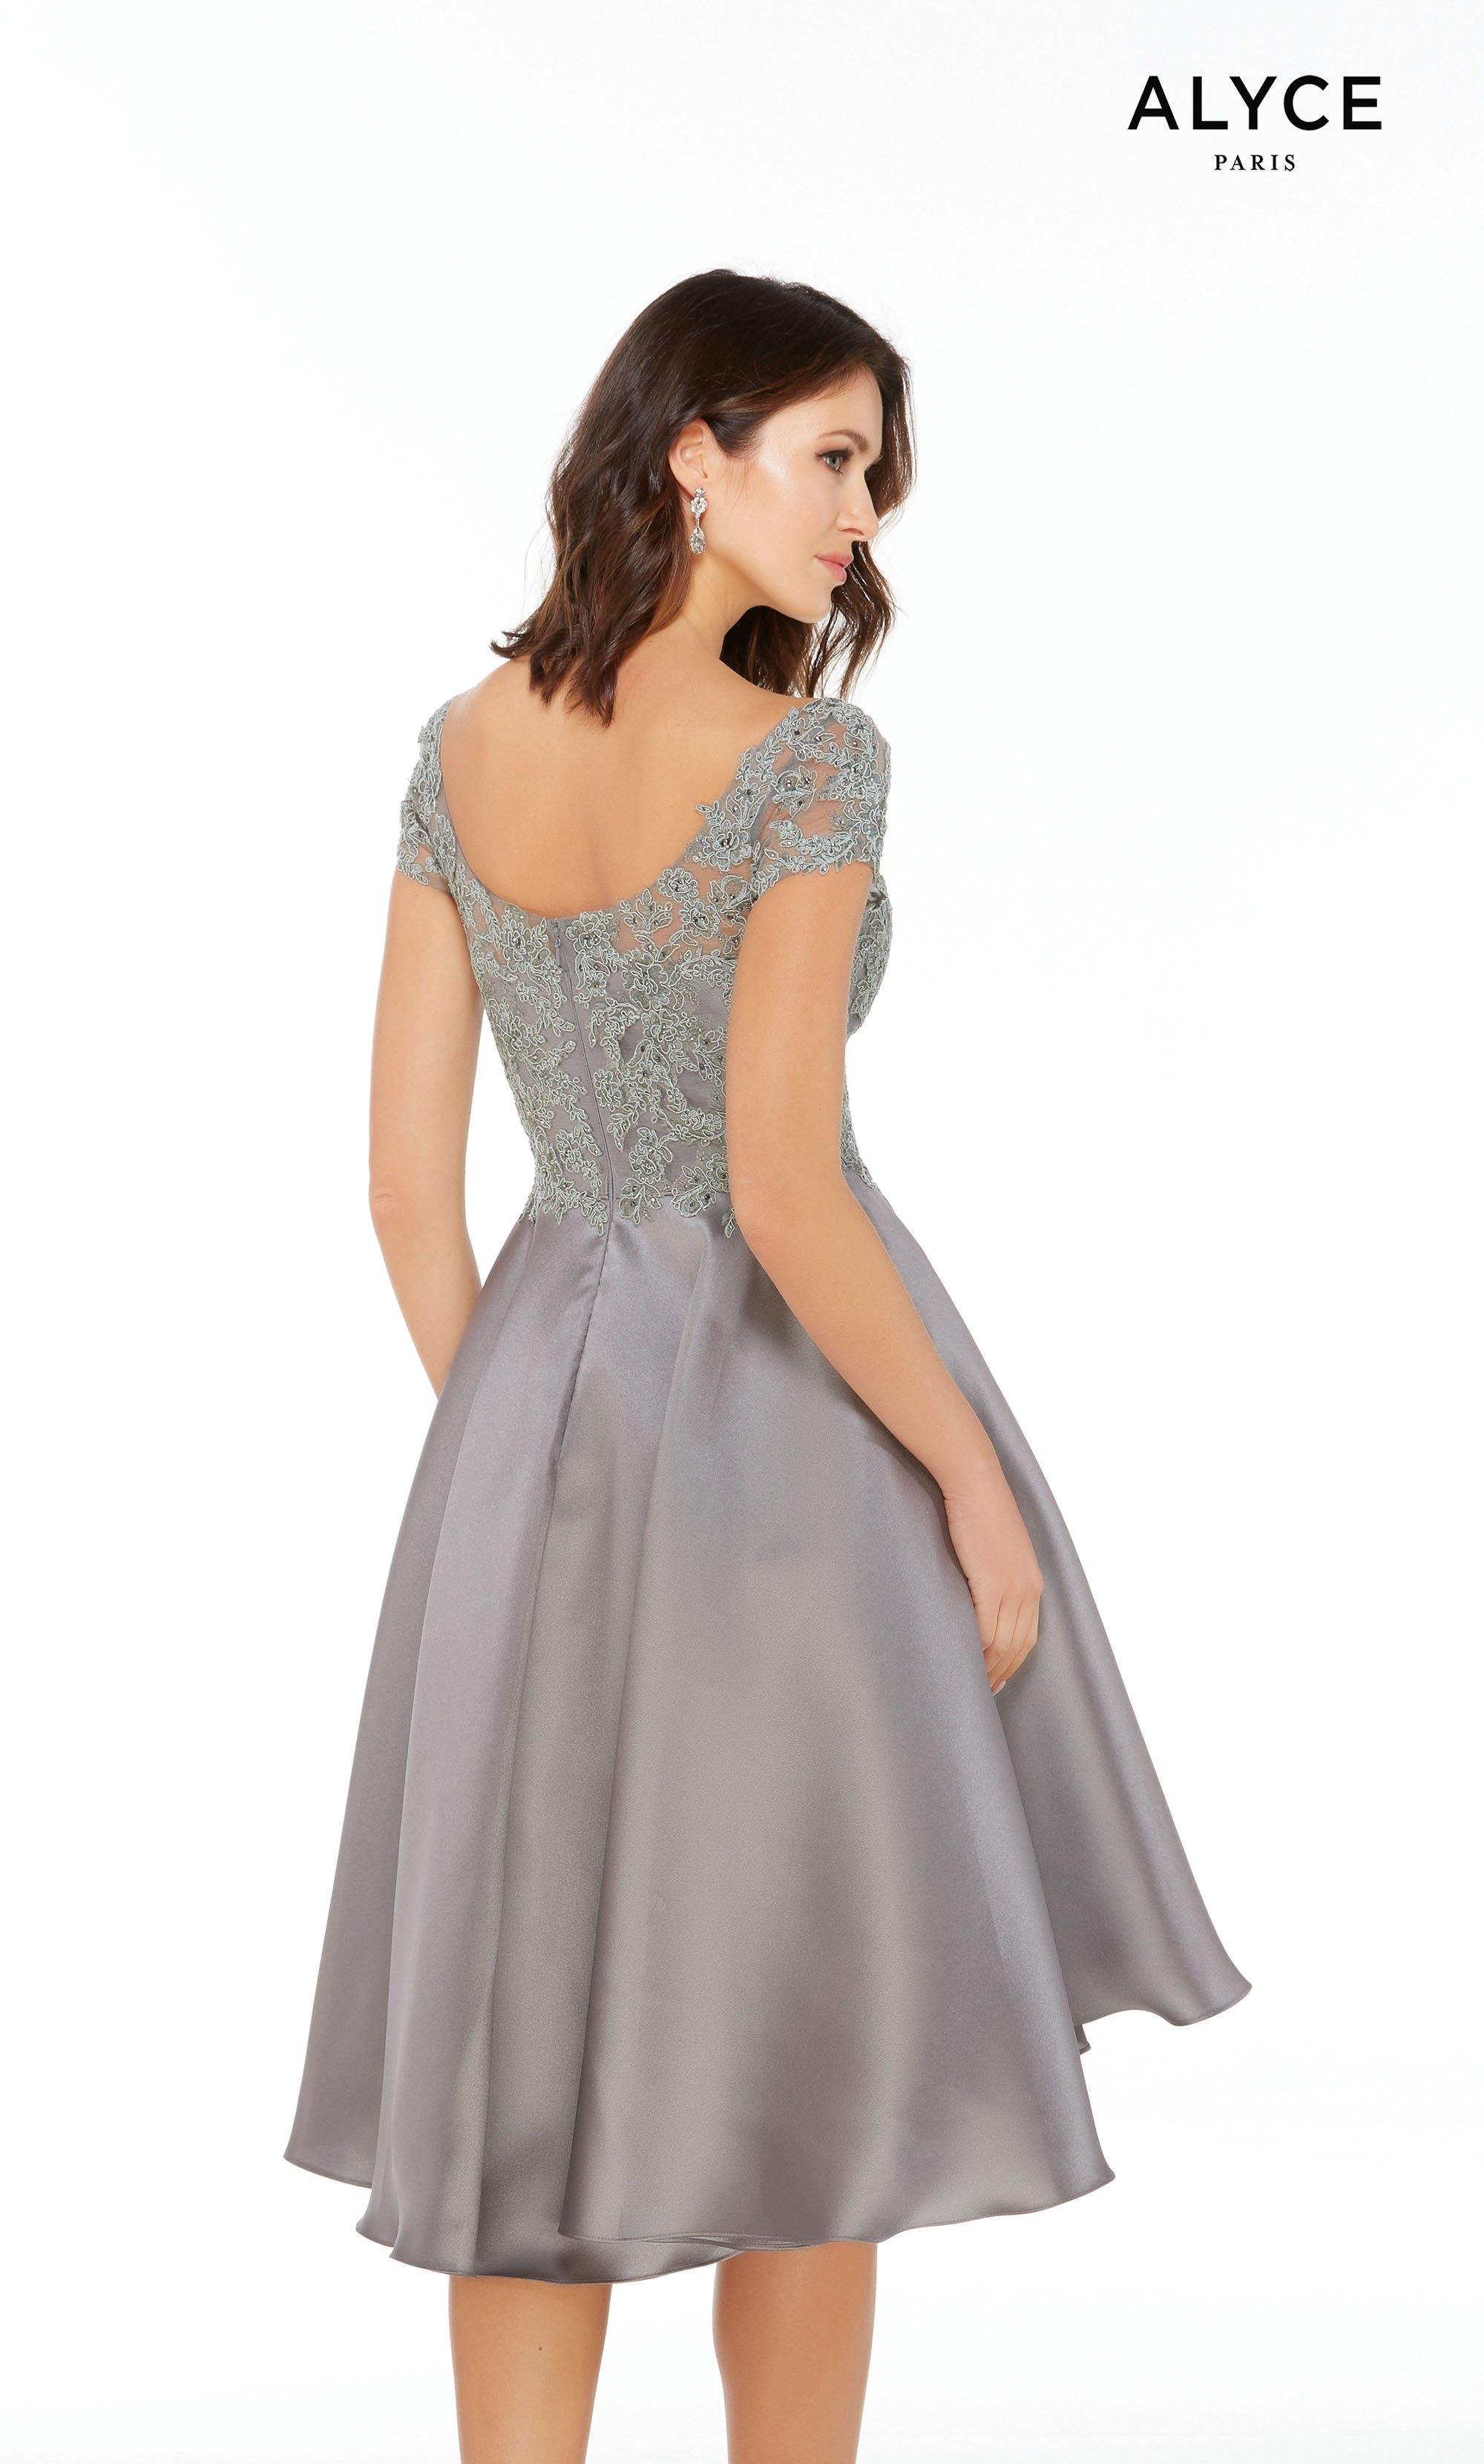 Grey Mikado high-low elegant mother of the bride dress with a scoop neck, lace bodice, and short sleeves